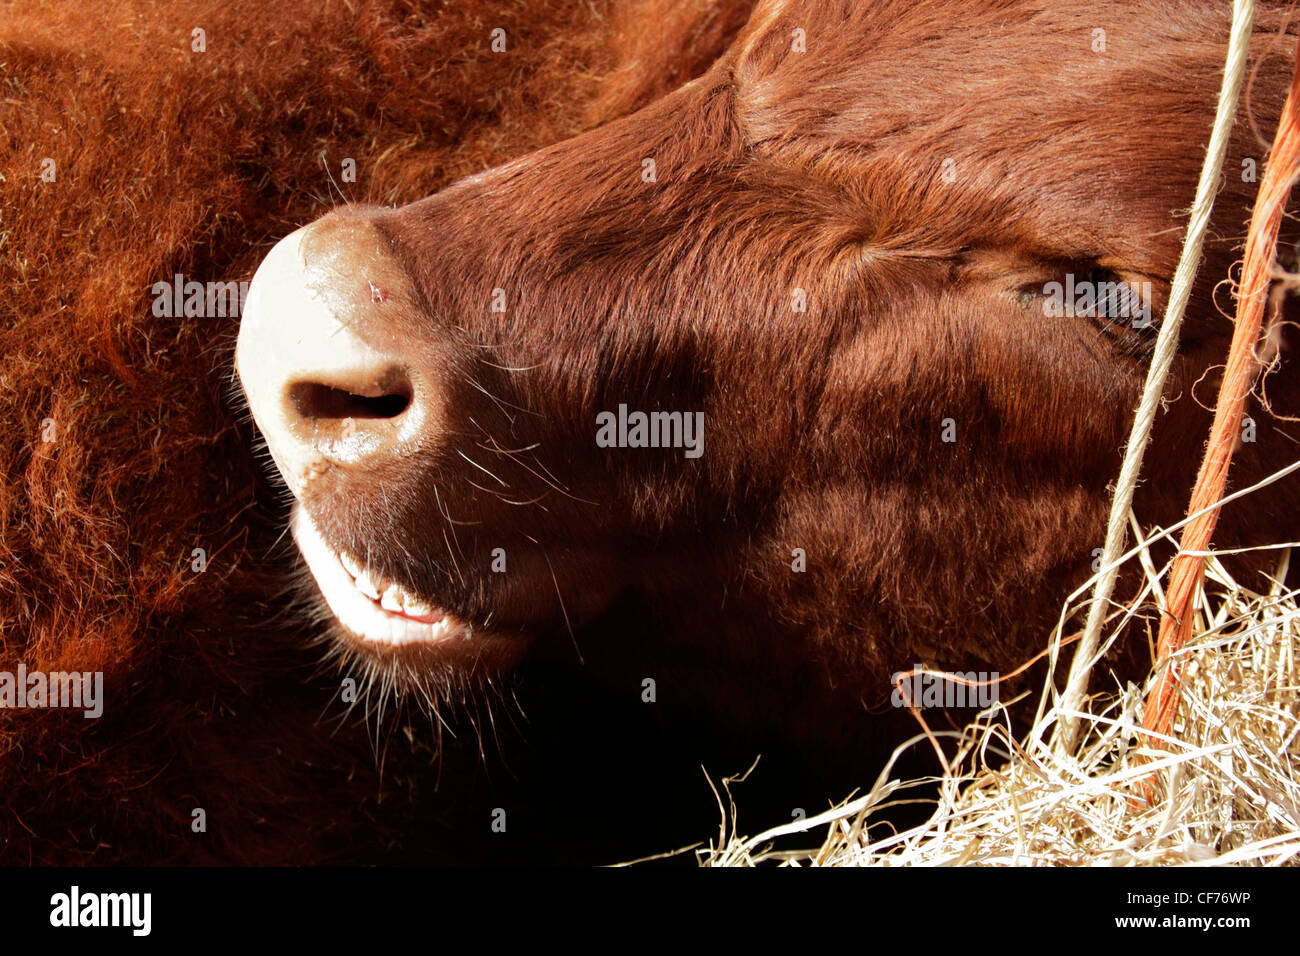 Red poll bullock close up Stock Photo